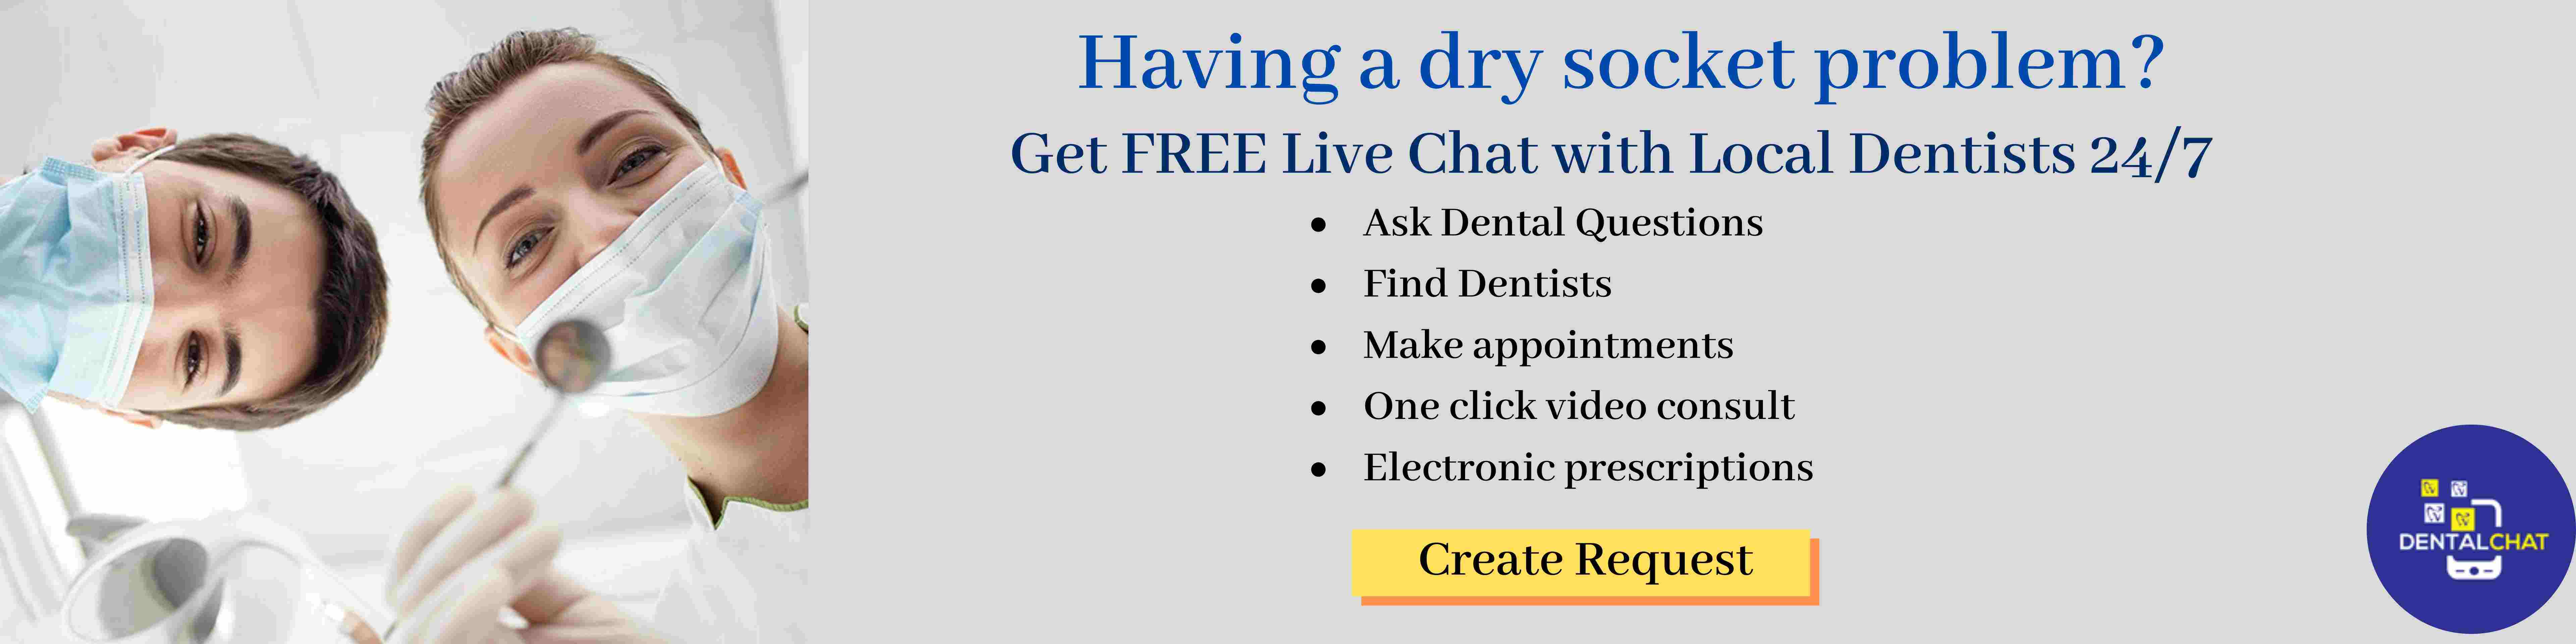 Dental Dry Socket Problems after Wisdom Tooth Extraction. Online Dry Socket Chat